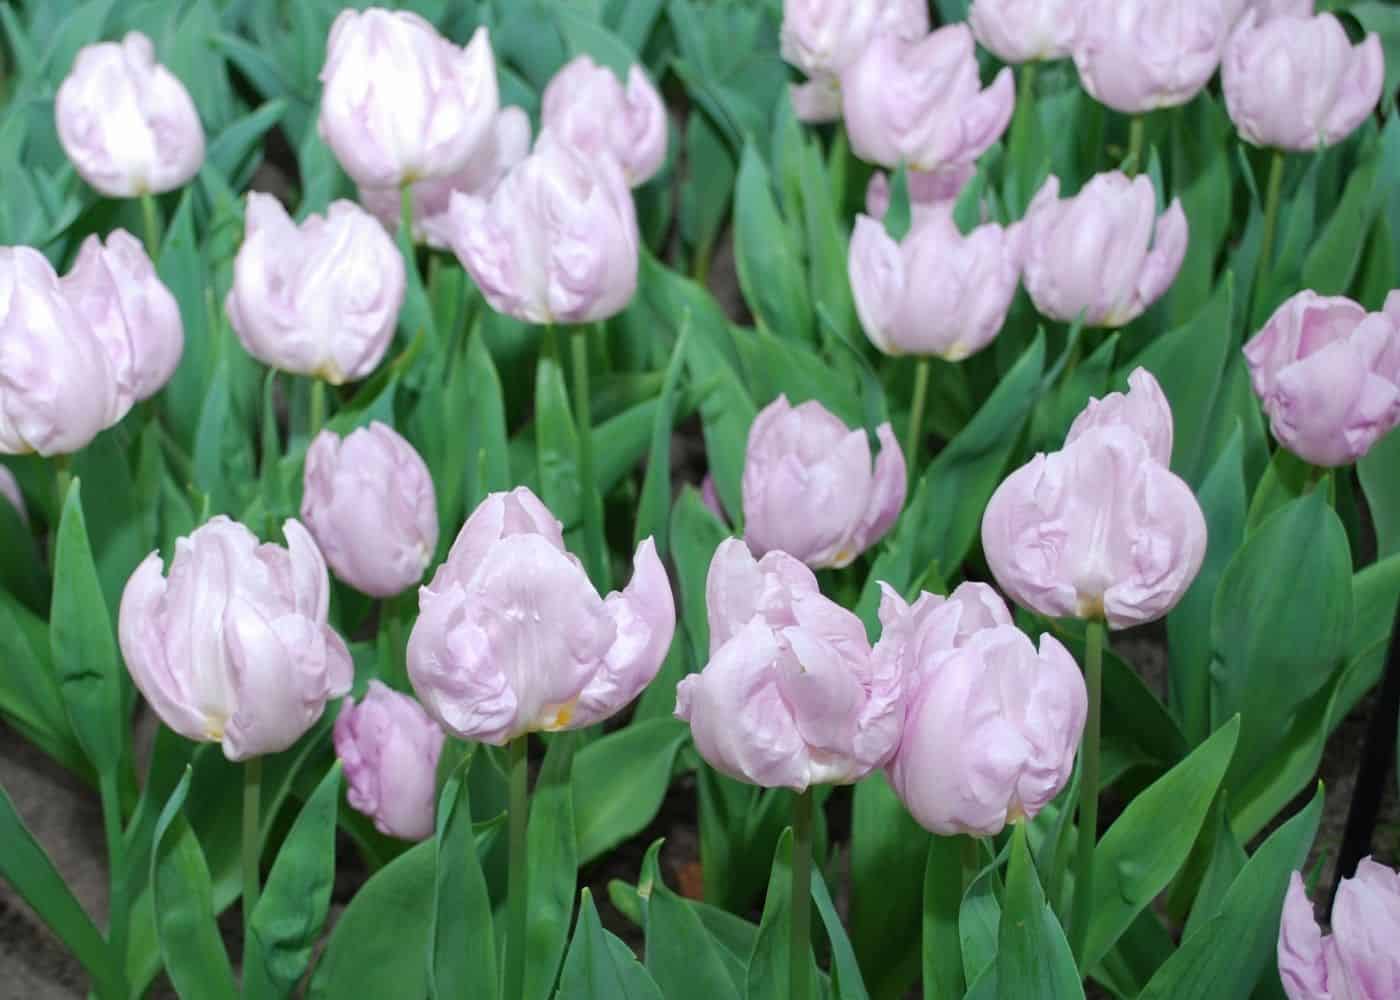 Candy prince tulips